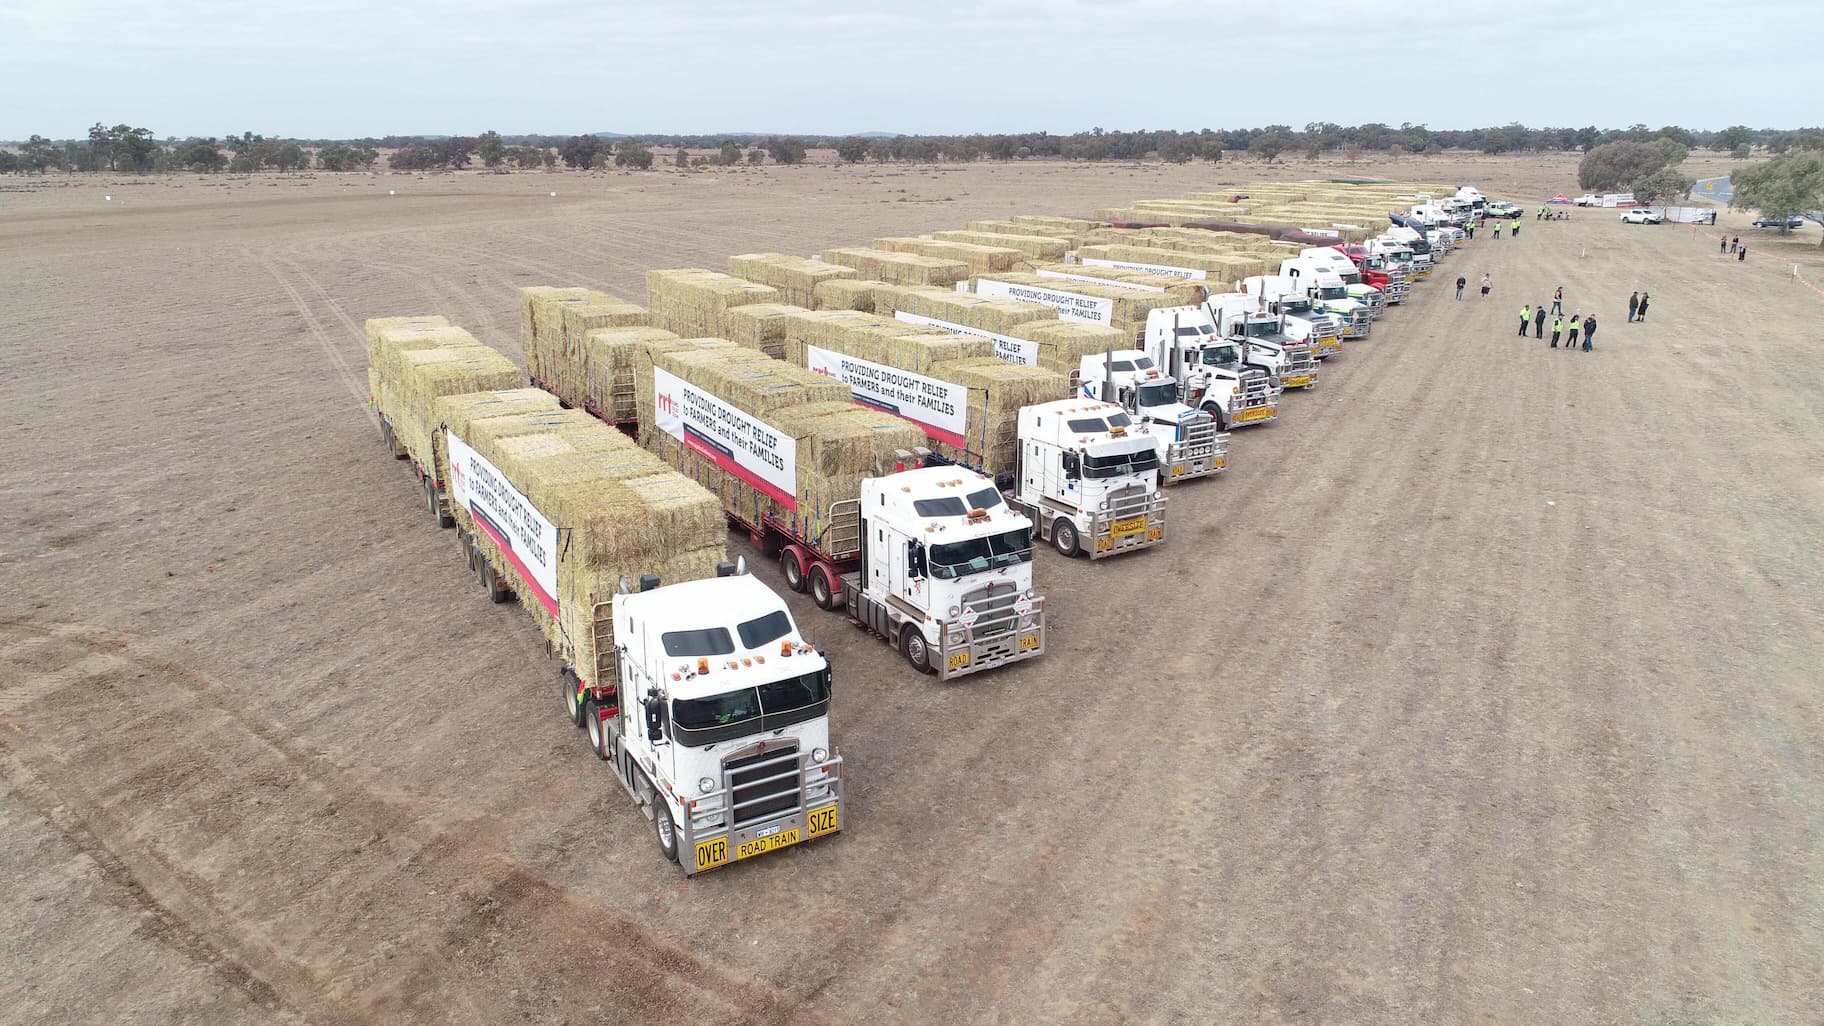 Drought Relief - Rapid Relief Team RRT Supporting Australians through hard times.  Trucks lined up donating hay bales 